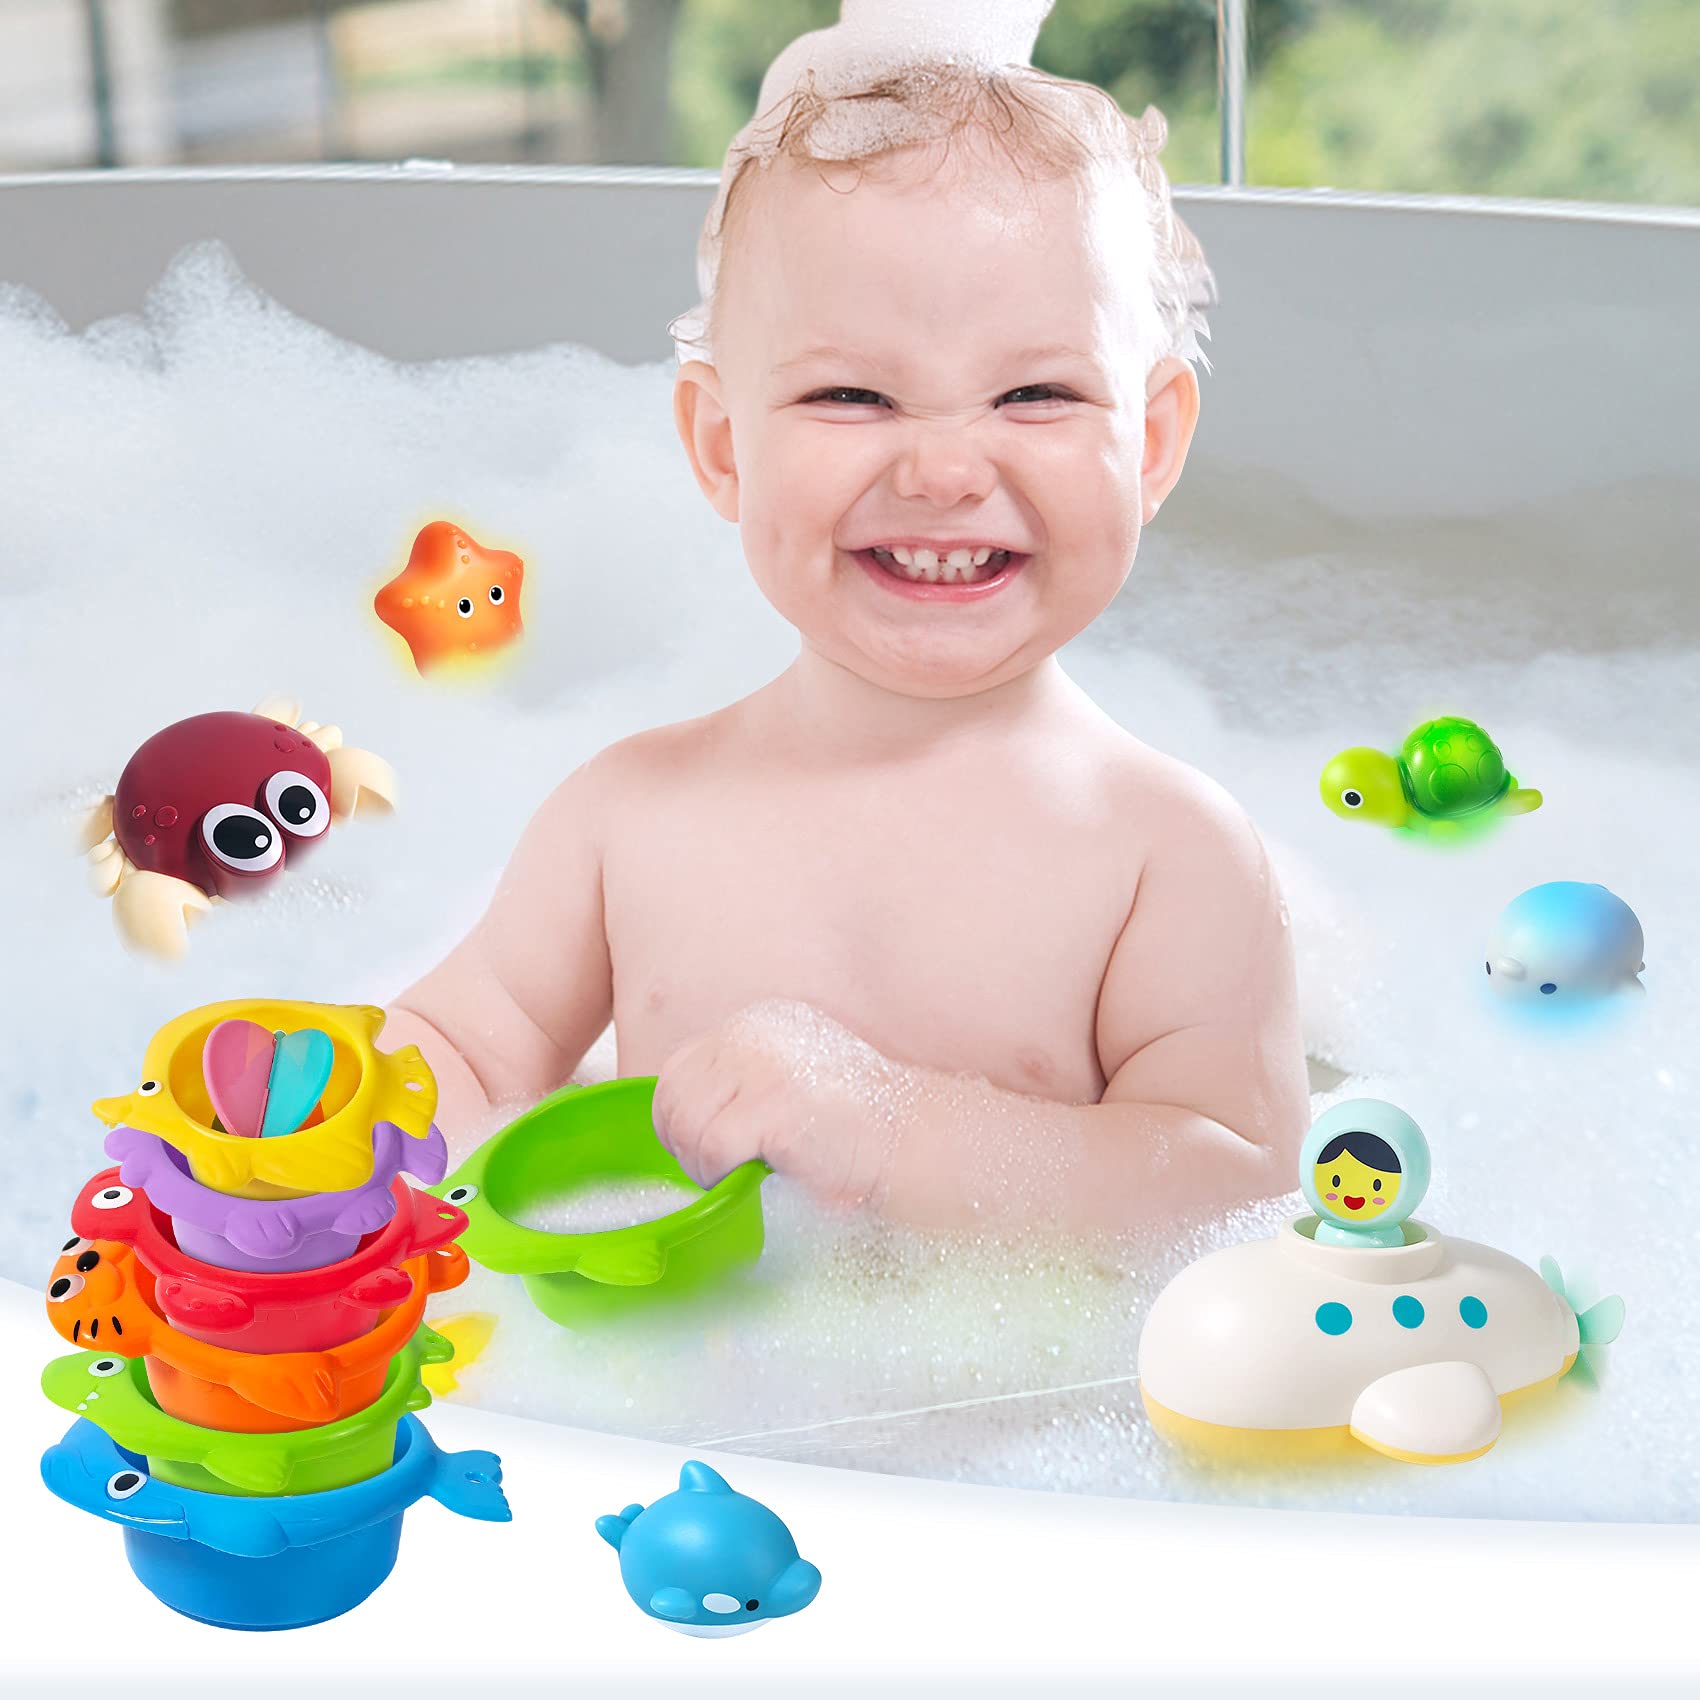 Bath Toys Gifts for Age 3 4 5 6 7 8+ Years Old Kids Boys Girls Toddlers - Swim Pool Bathtub Tub Toys for Toddlers Summer, Stacking Cup with Wind Up Water Toys for Baby Birthday Christmas